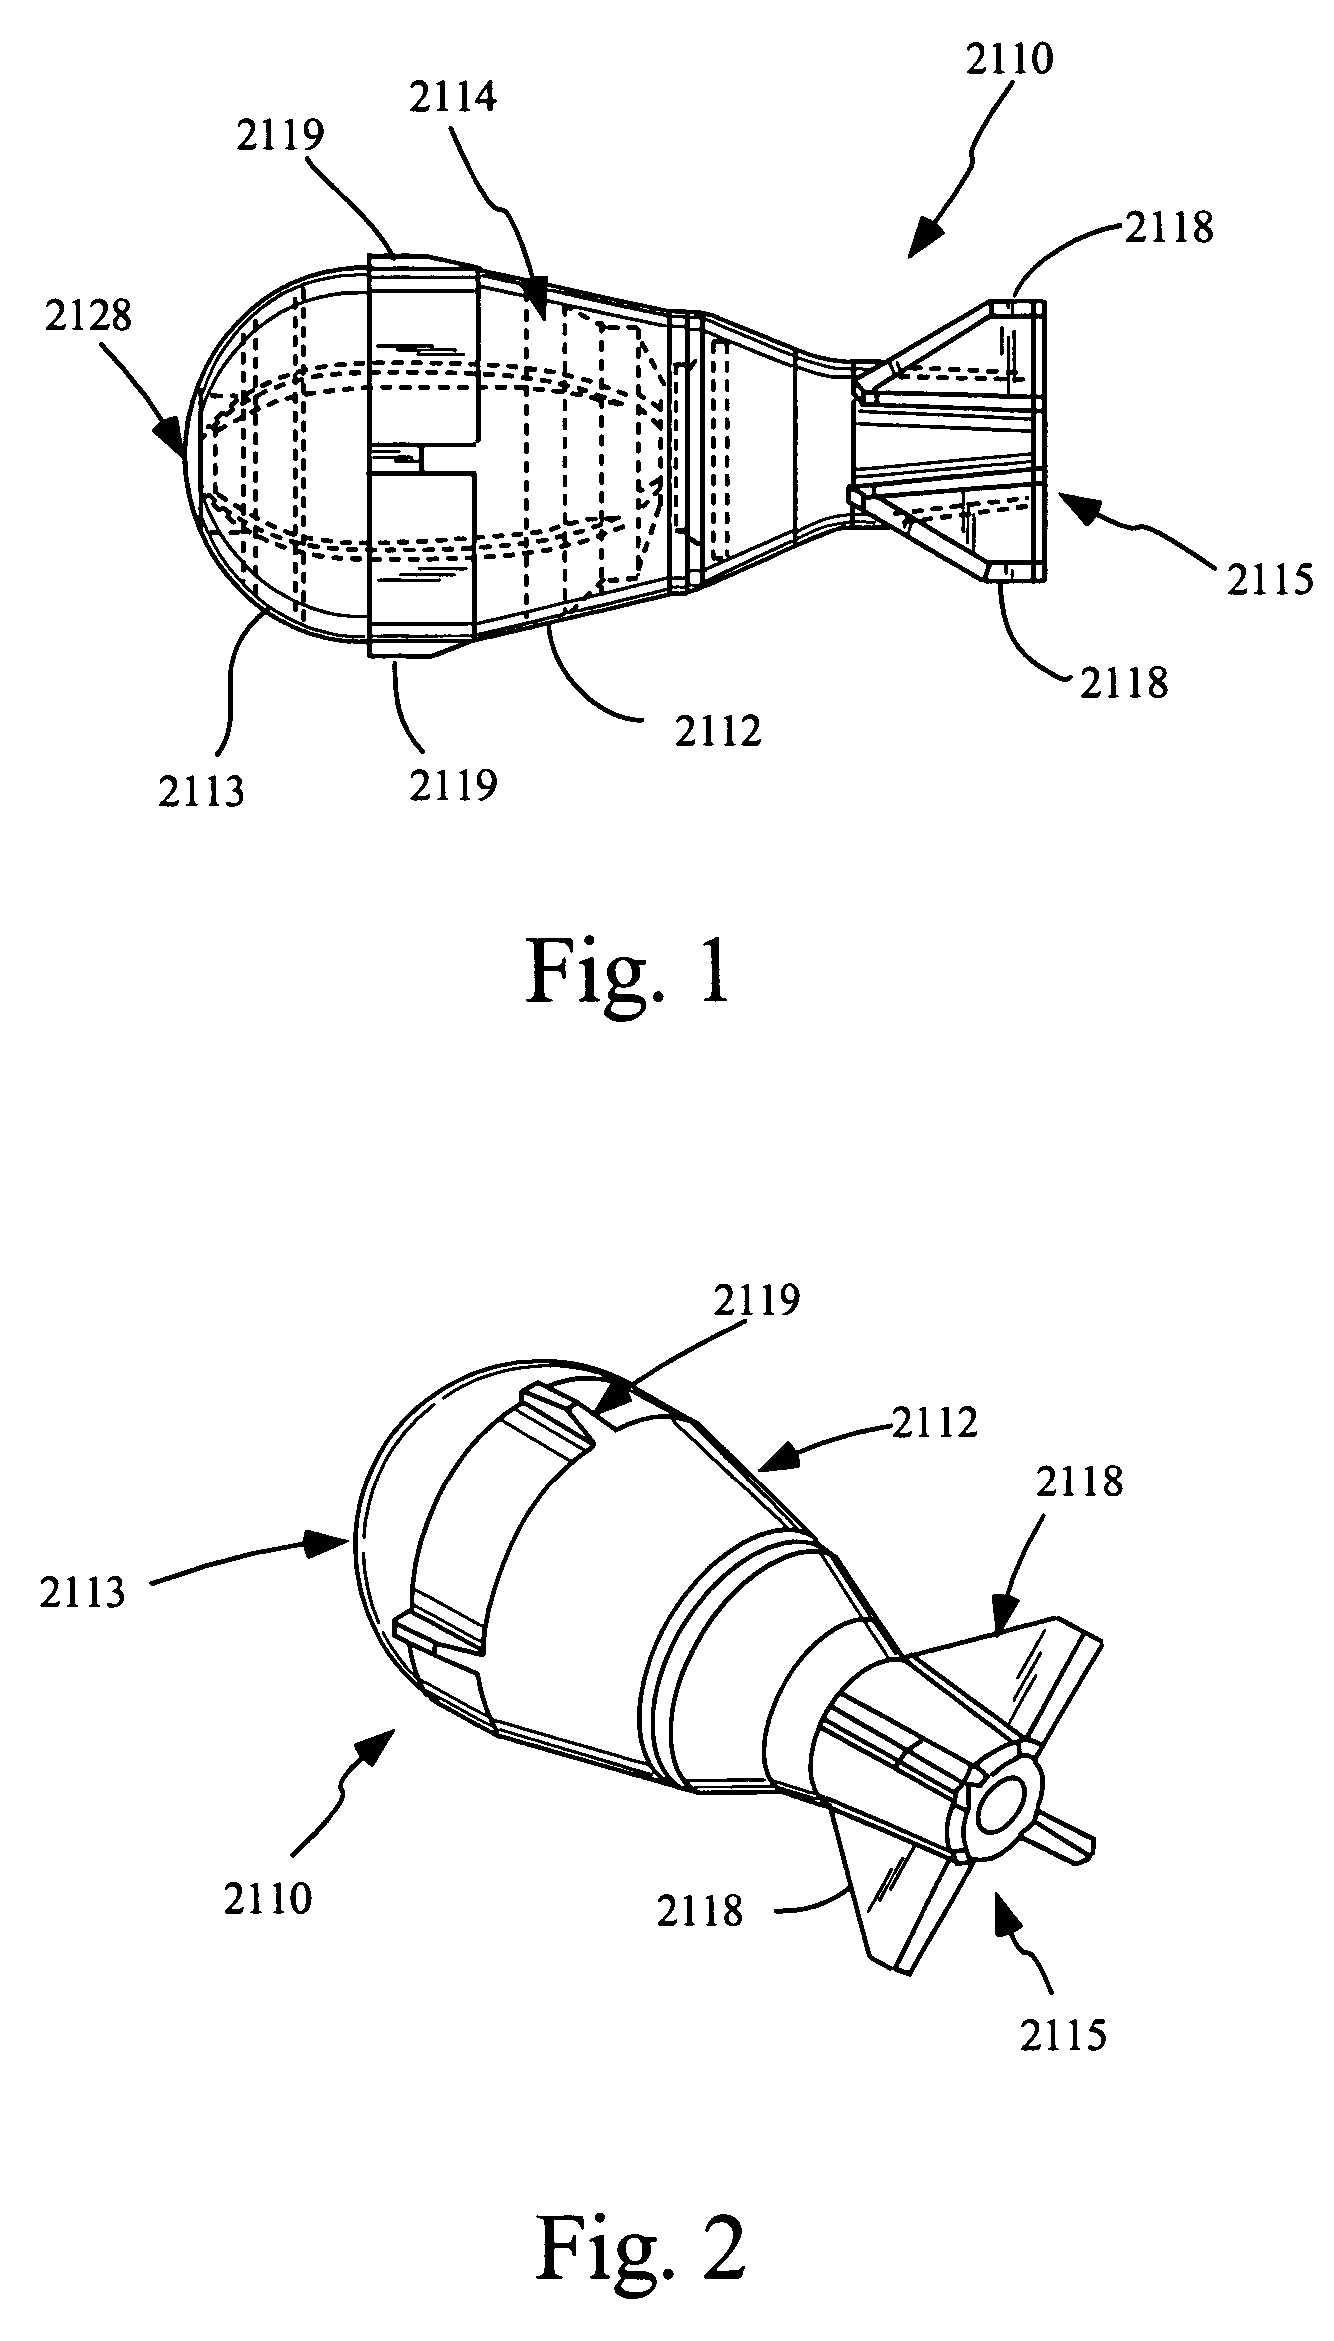 Stabilized non-lethal projectile systems